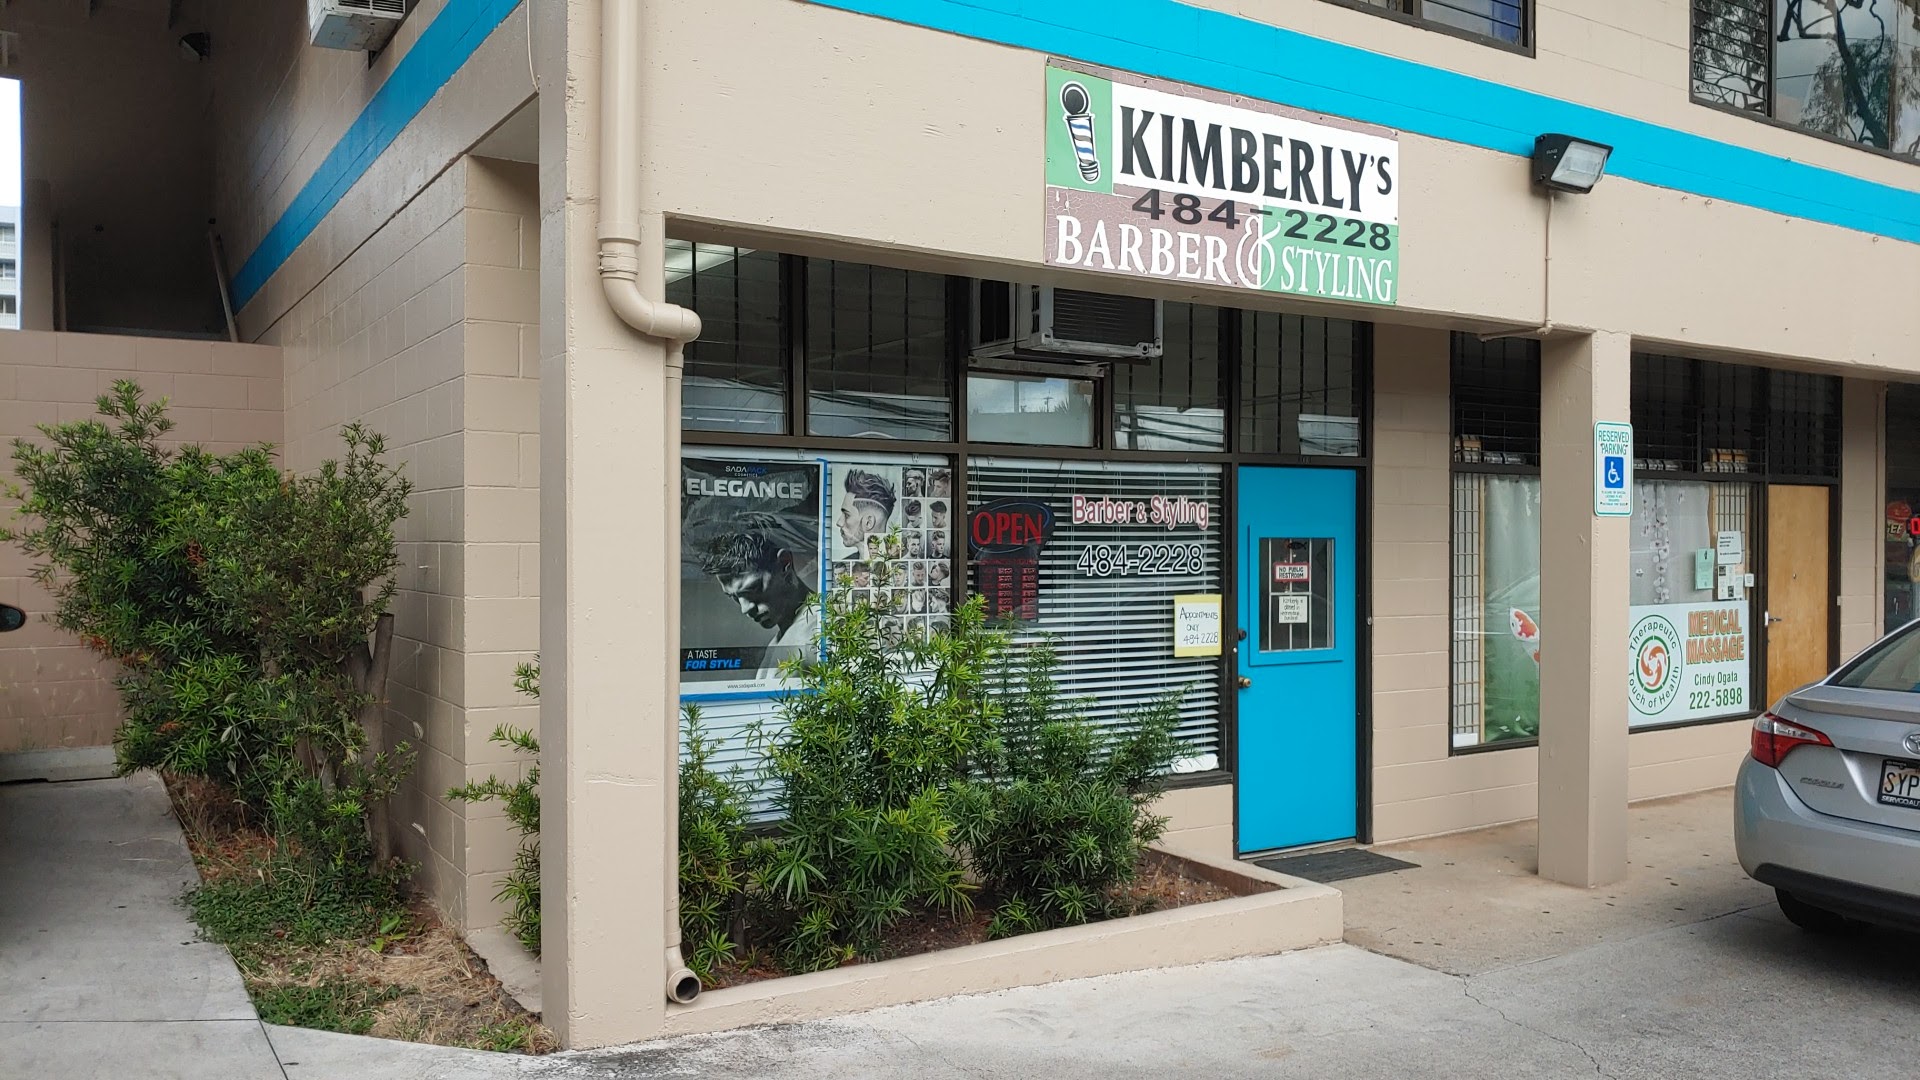 Kimberly's Barber & Hairstyling